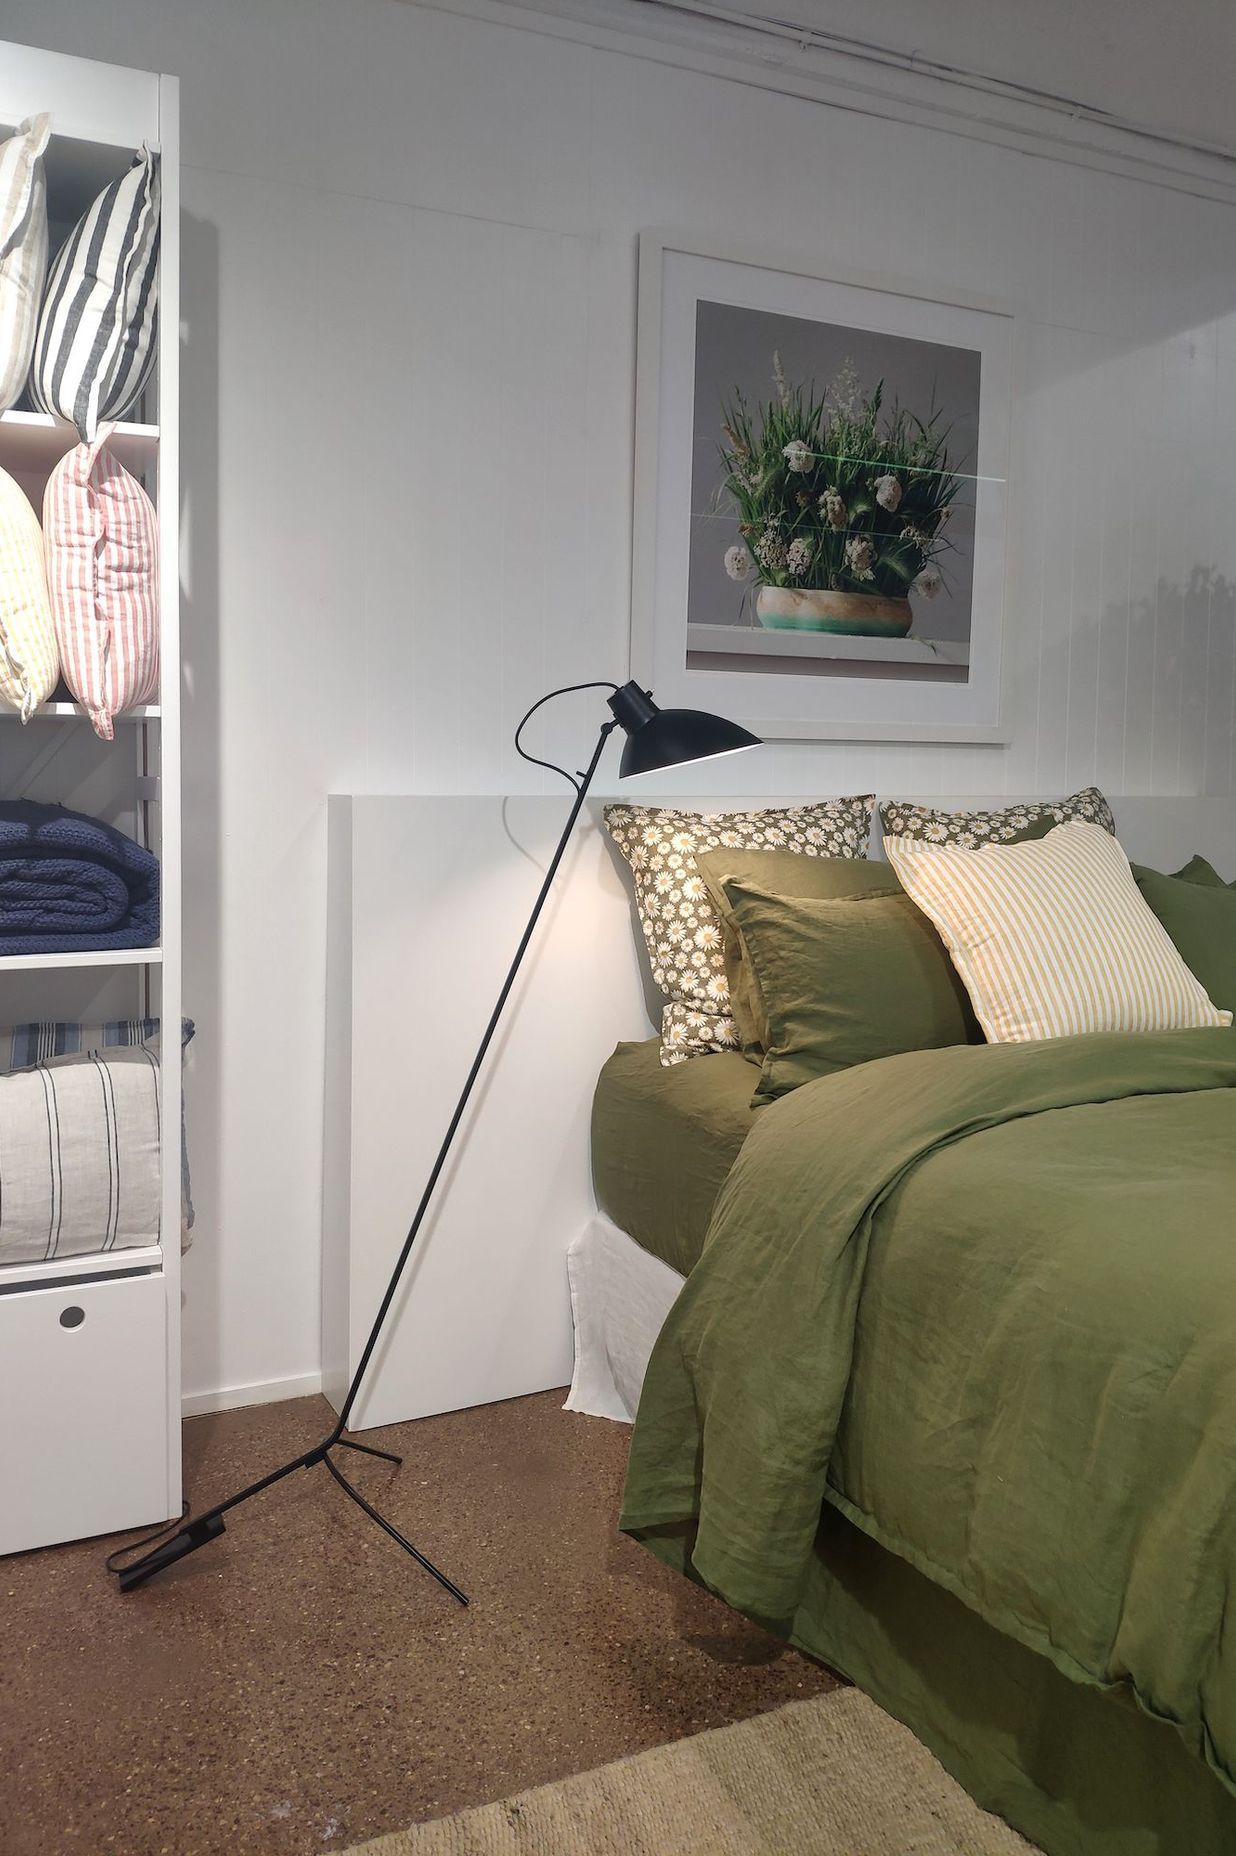 Image Features VV Cinquanta Floor Lamp from Astep